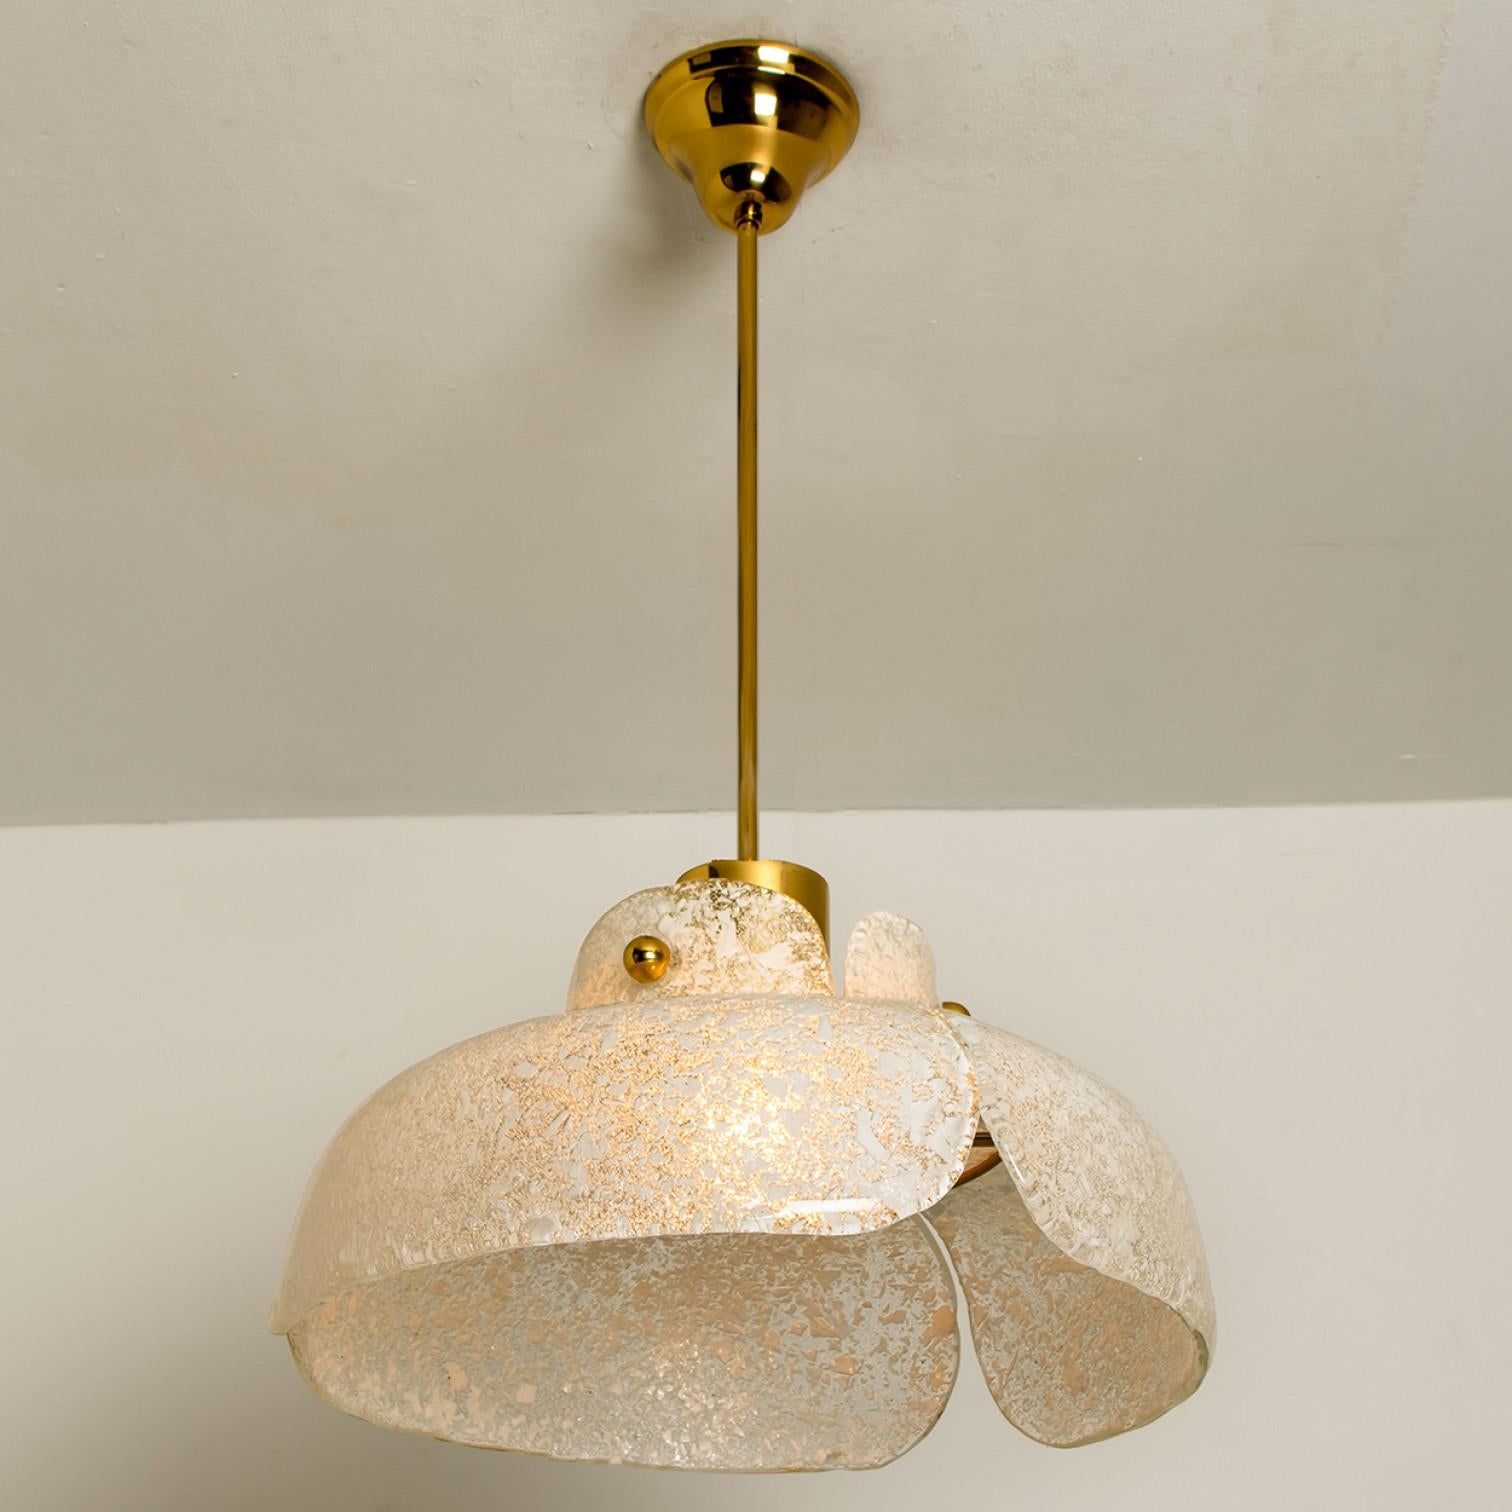 Beautiful pendant lamp in the shape of a flower. In the style of Kalmar.
Three leaf-like pieces of thick speckled glass are wrapped around a glossy brass base.
The light shining trough the glass gives special effect.

In excellent vintage condition.